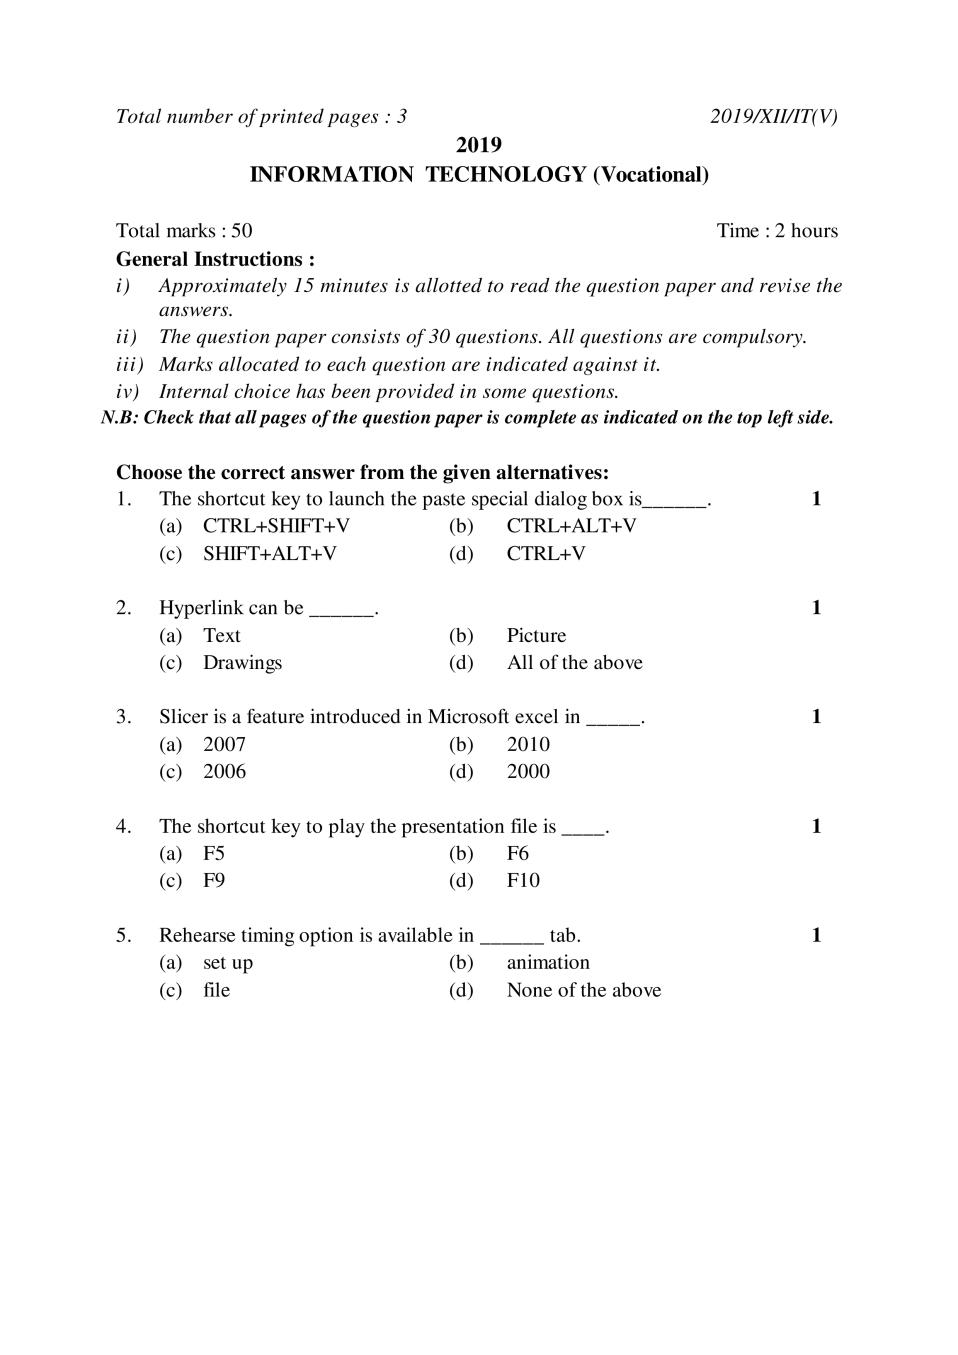 NBSE Class 12 Question Paper 2019 for Fund of Information Technology Vocational - Page 1